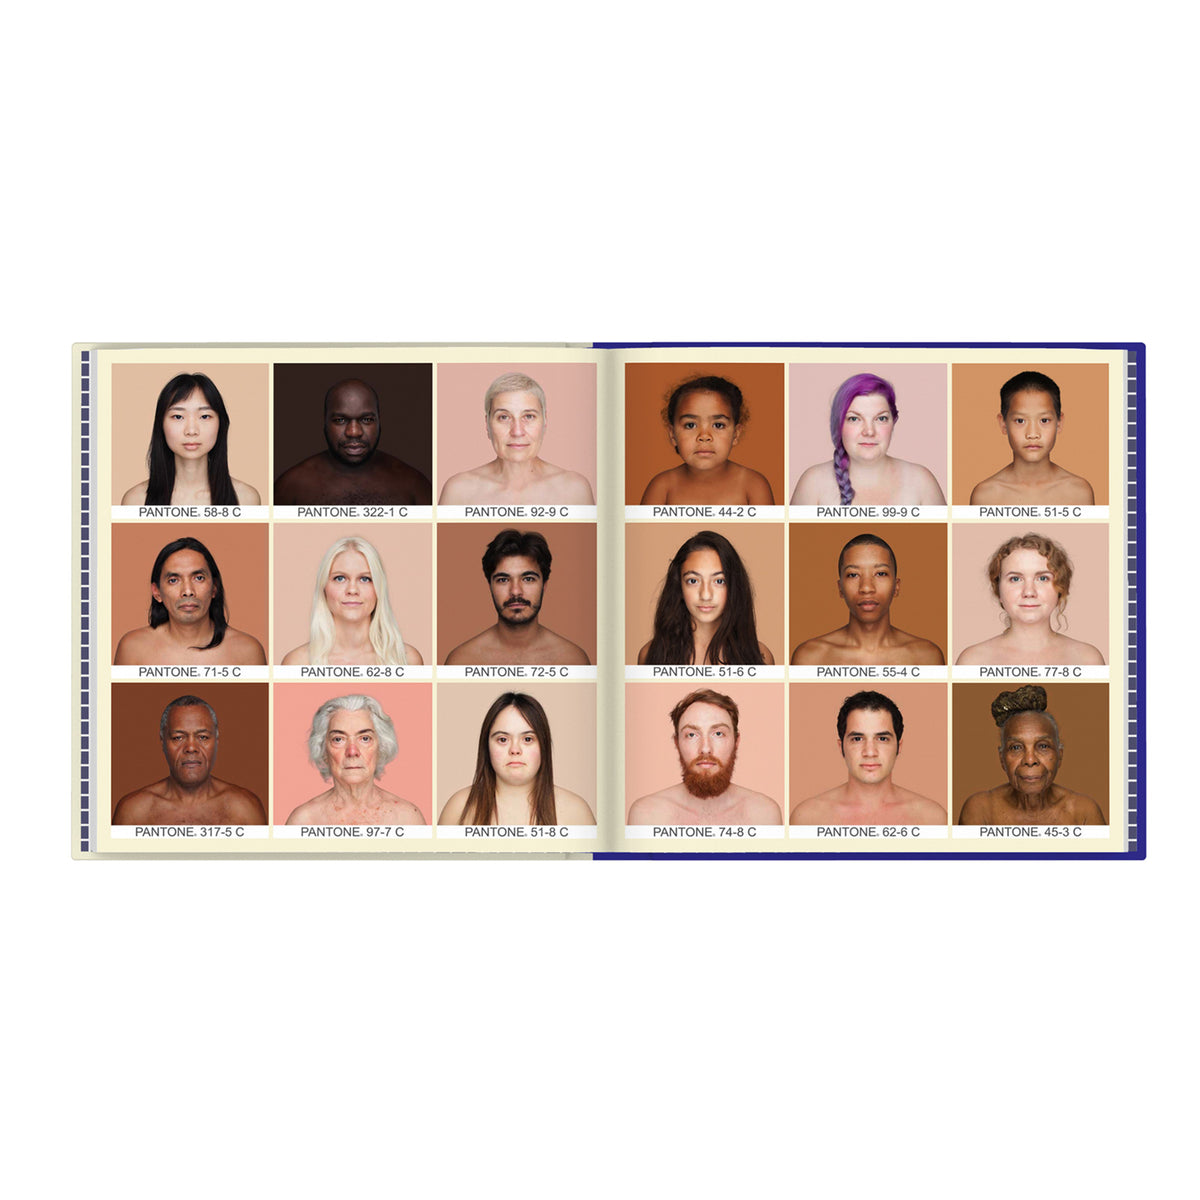 A photo grid spread featuring several portraits from The Colors We Share.